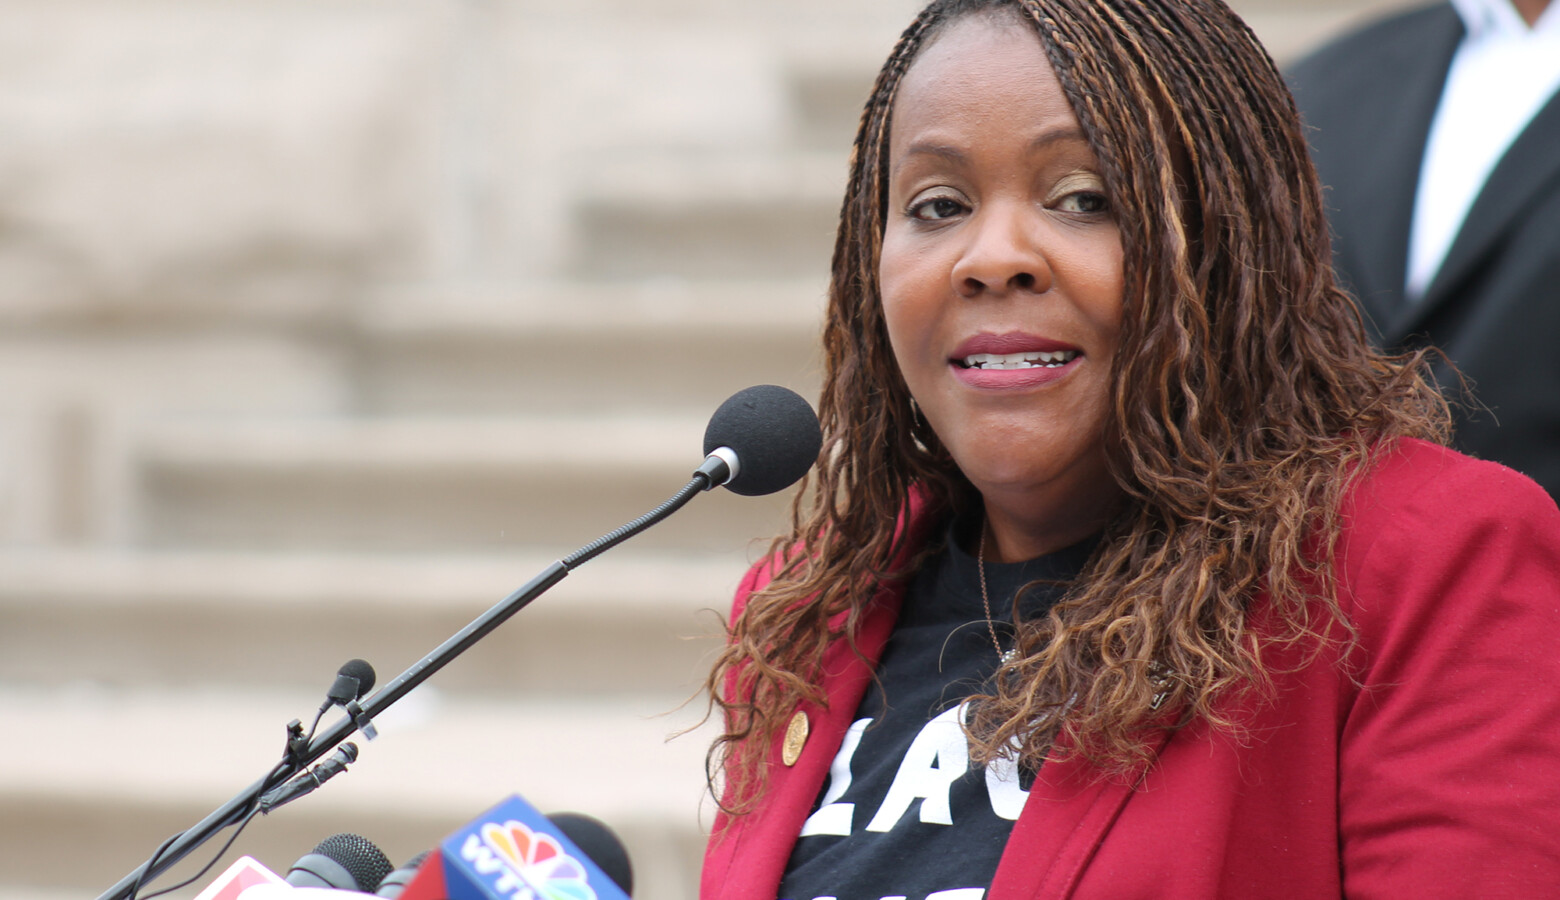 Indiana Black Legislative Caucus Chair Rep. Robin Shackleford (D-Indianapolis) said she wants to see more action from Gov. Eric Holcomb on justice reform. (Lauren Chapman/IPB News)